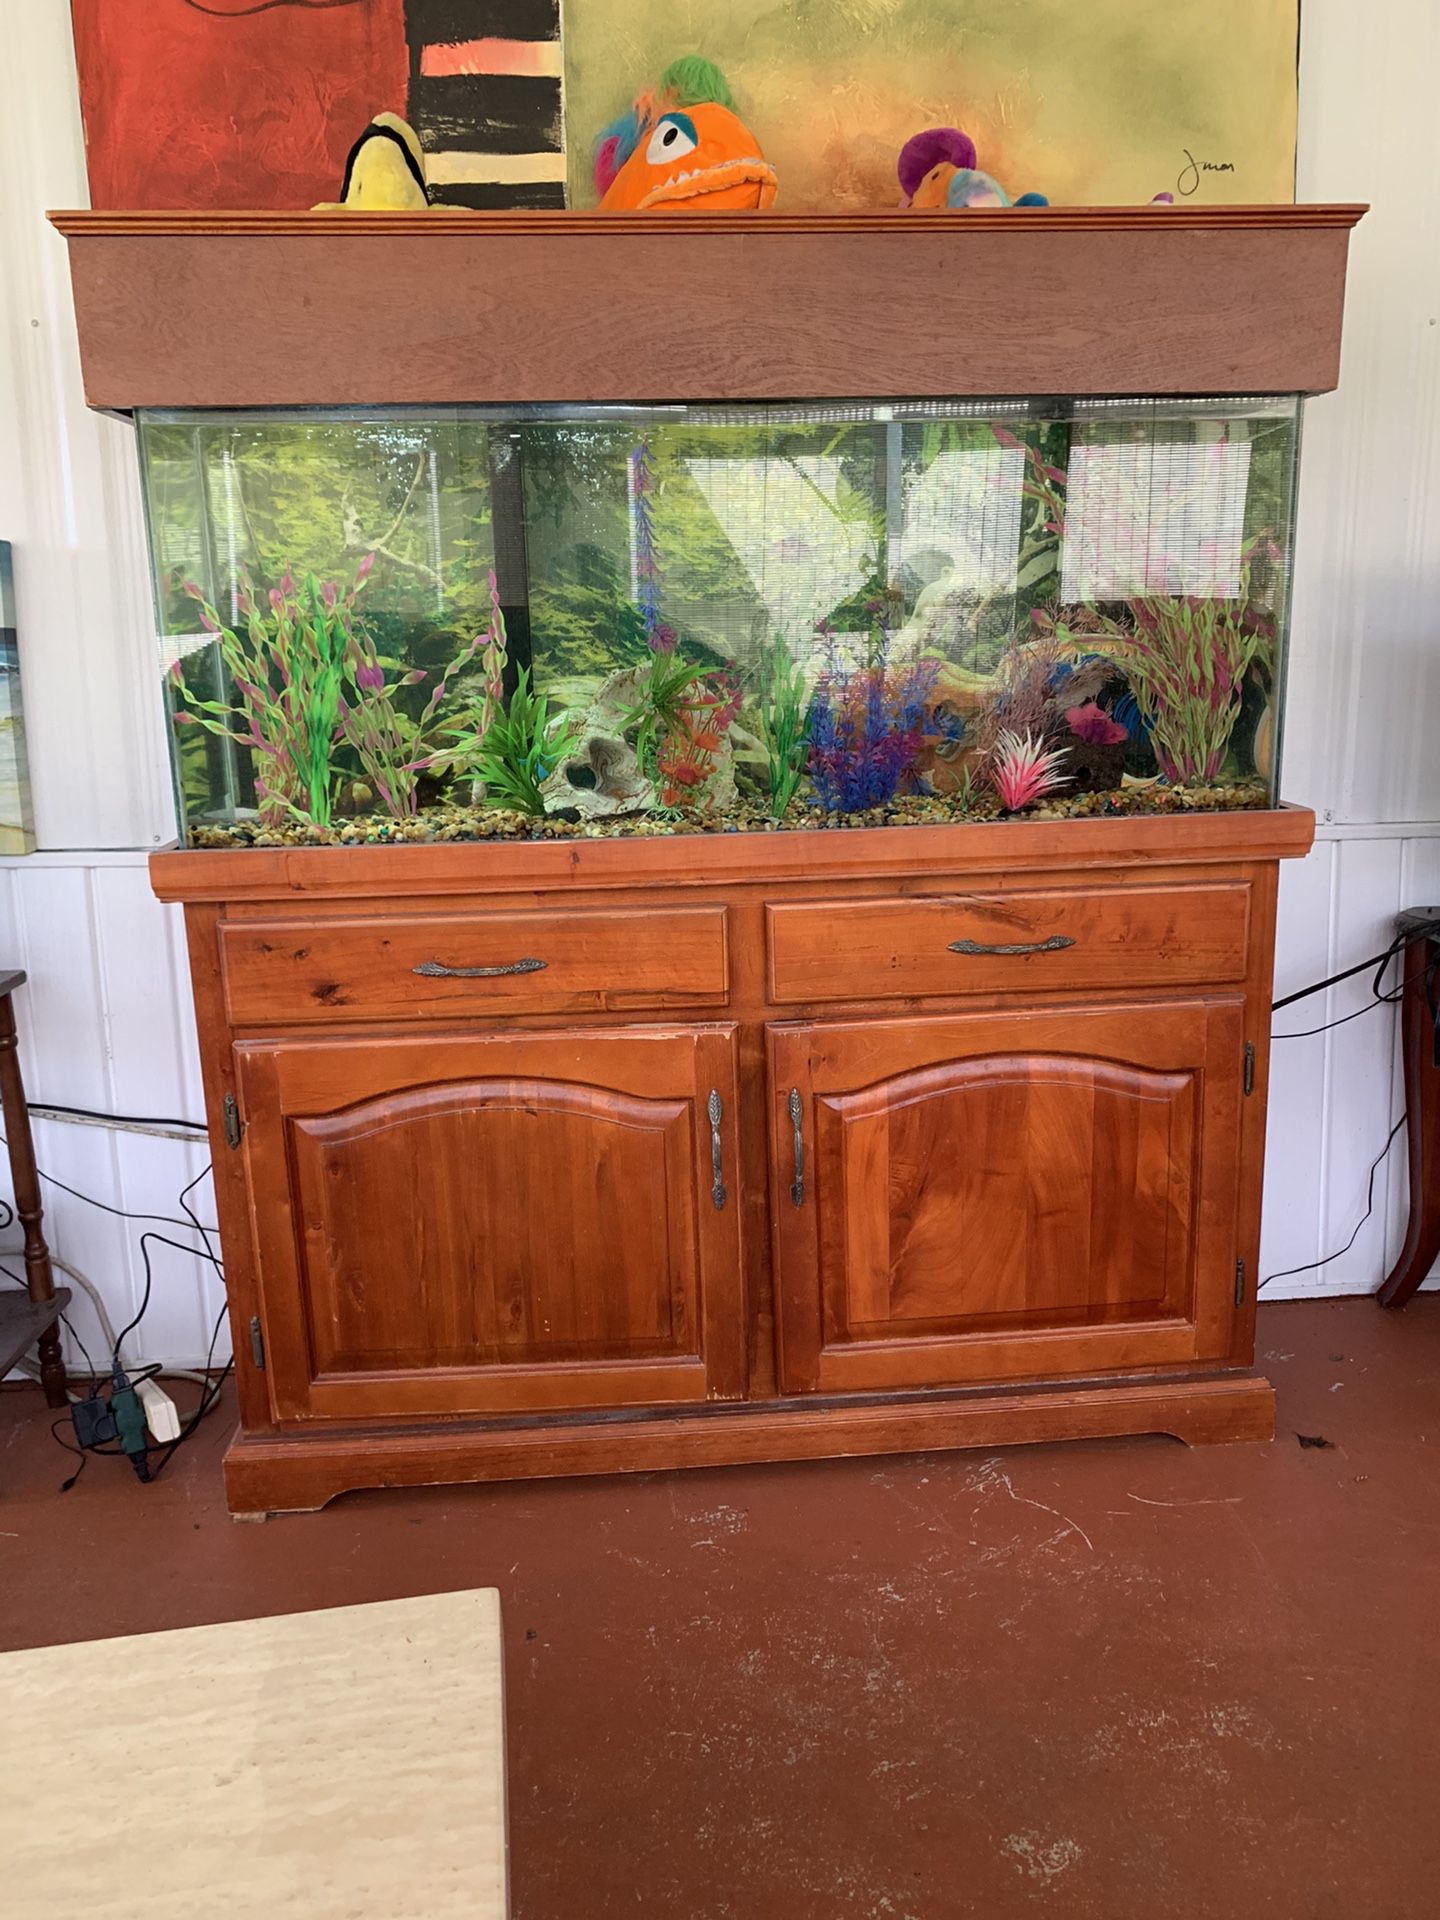 55 gallon fish tank, fully functional with over the side double filter and a fumal filter underneath. All rocks, plants, decorations and 6 fish are i